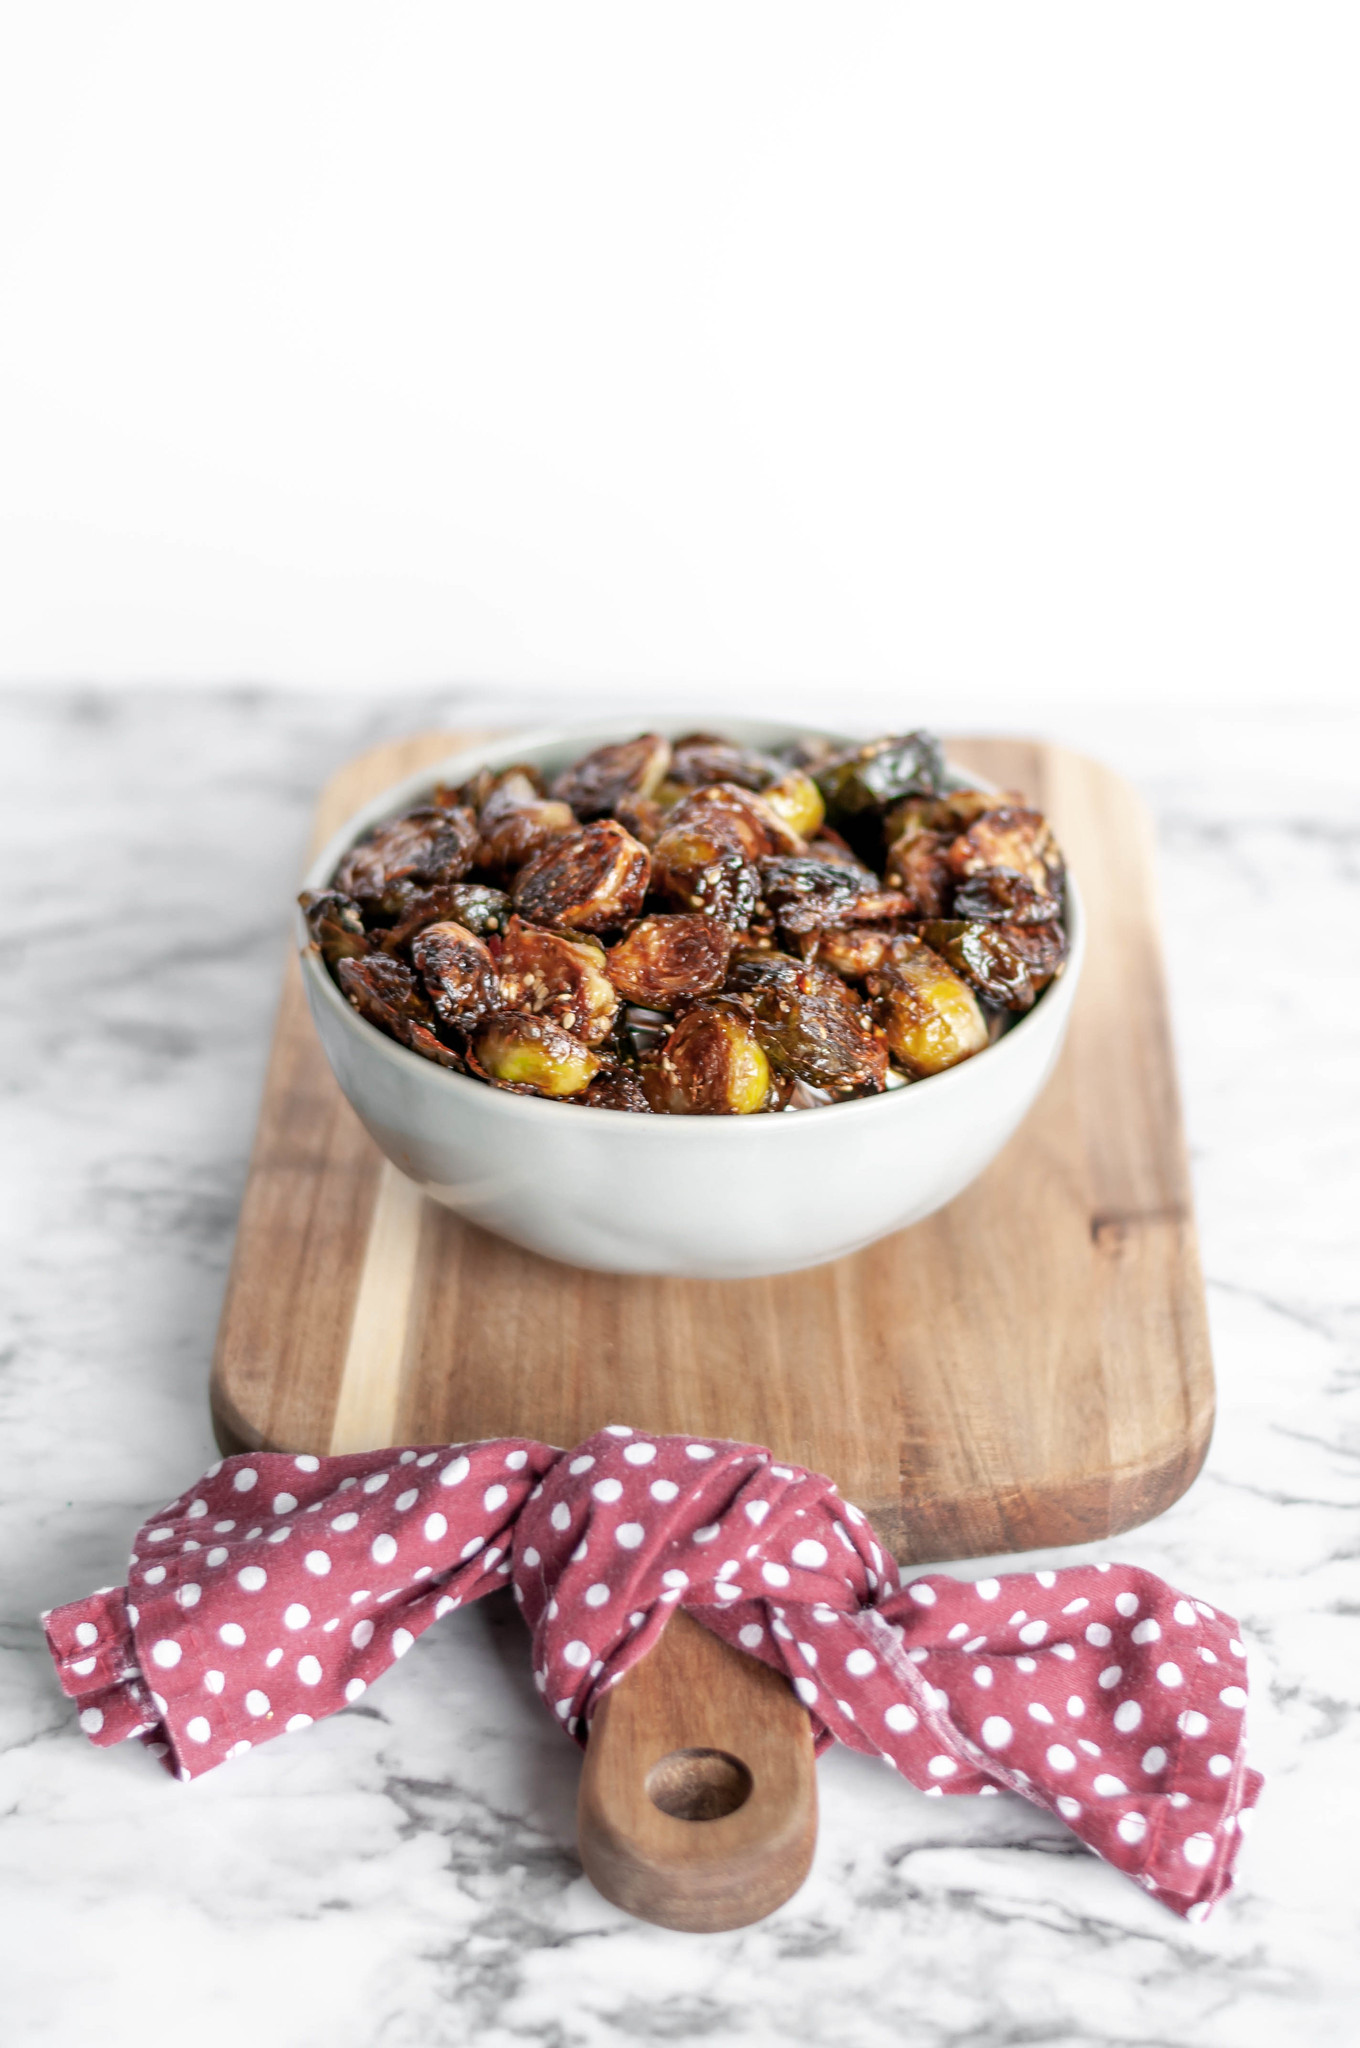 Thai Sweet Chili Brussels Sprouts are going to be your new favorite Thanksgiving side dish. Roasted in the oven to crispy, sweet perfection.